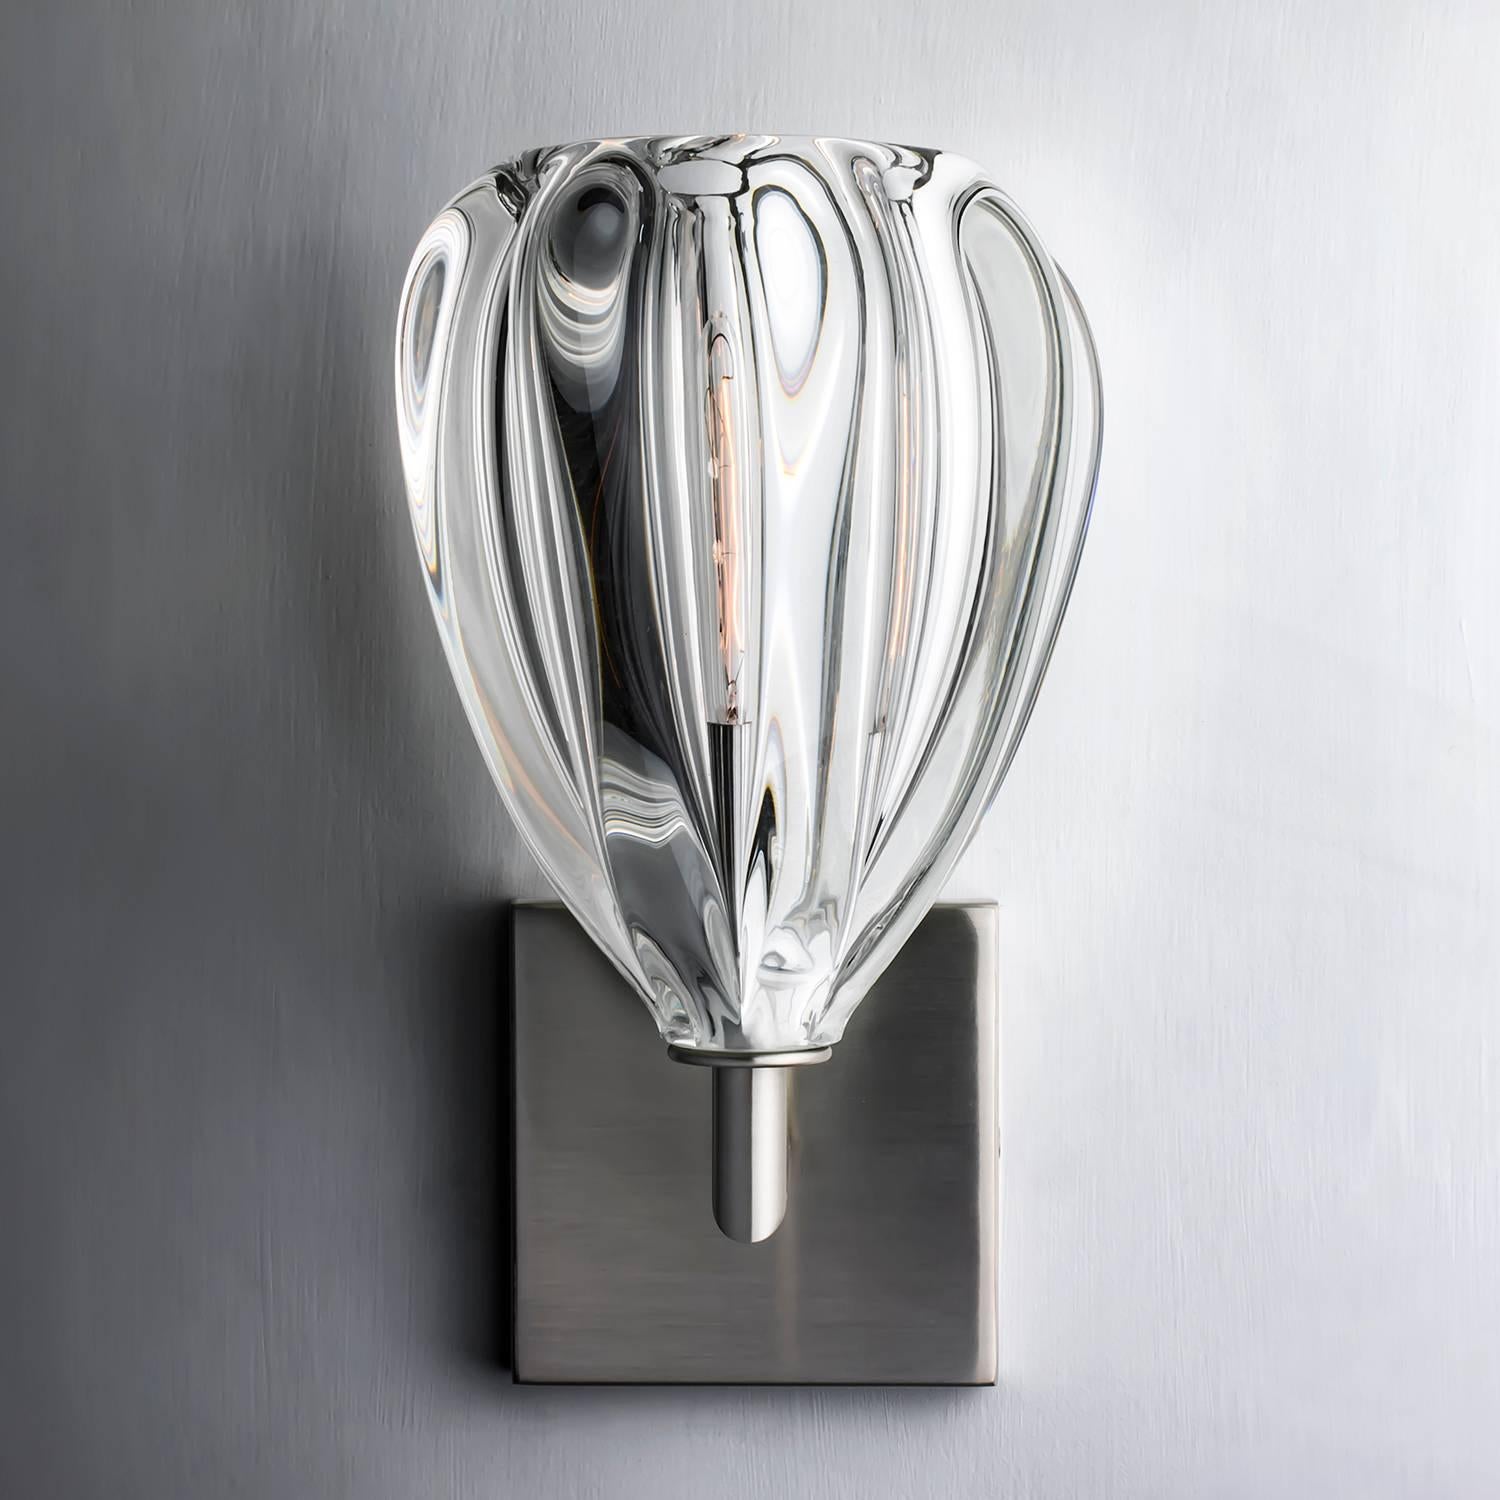 This series of wall sconces is classically inspired. Scaled versions of our pendants extend from elegant metal armatures. The proximity of the glass to the wall allows for each piece’s unique light pattern to be magnified. Hand blown and shaped in